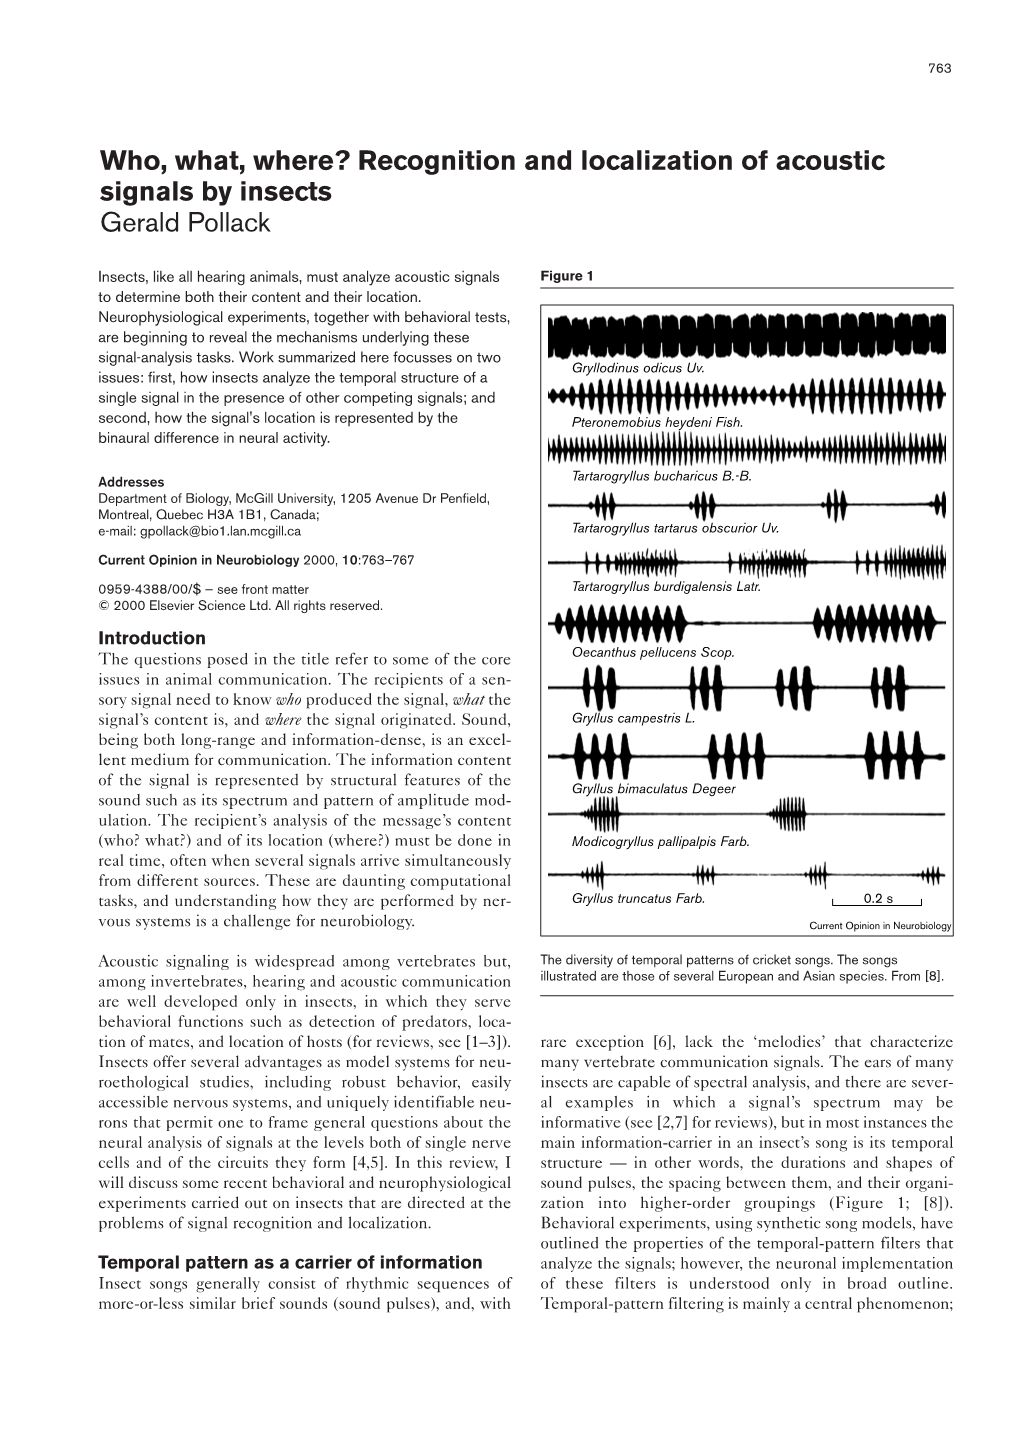 Who, What, Where? Recognition and Localization of Acoustic Signals by Insects Gerald Pollack